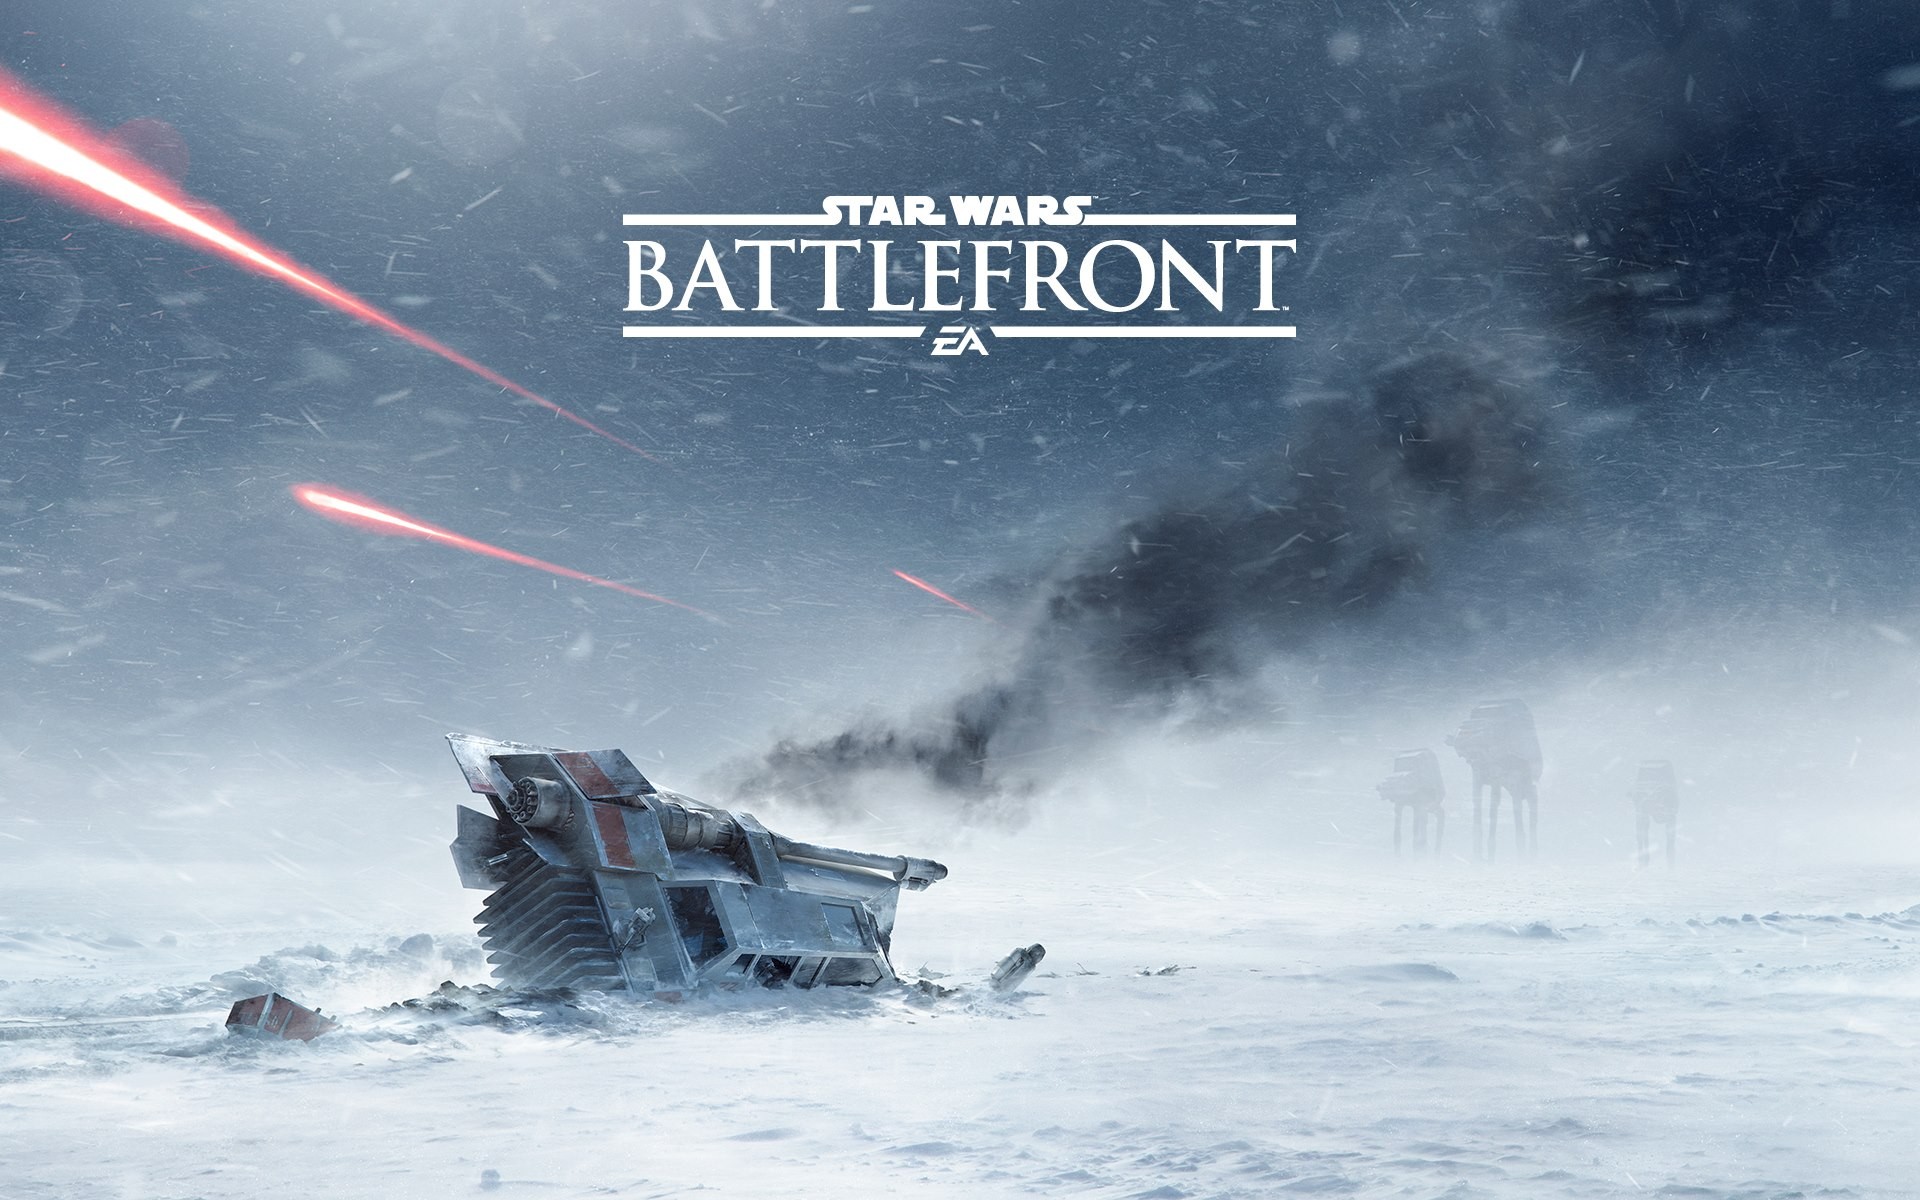 Star Wars Star Wars Battlefront Video Games Hoth Snow LucasArts Battle Of Hoth EA DiCE Wreck 1920x1200